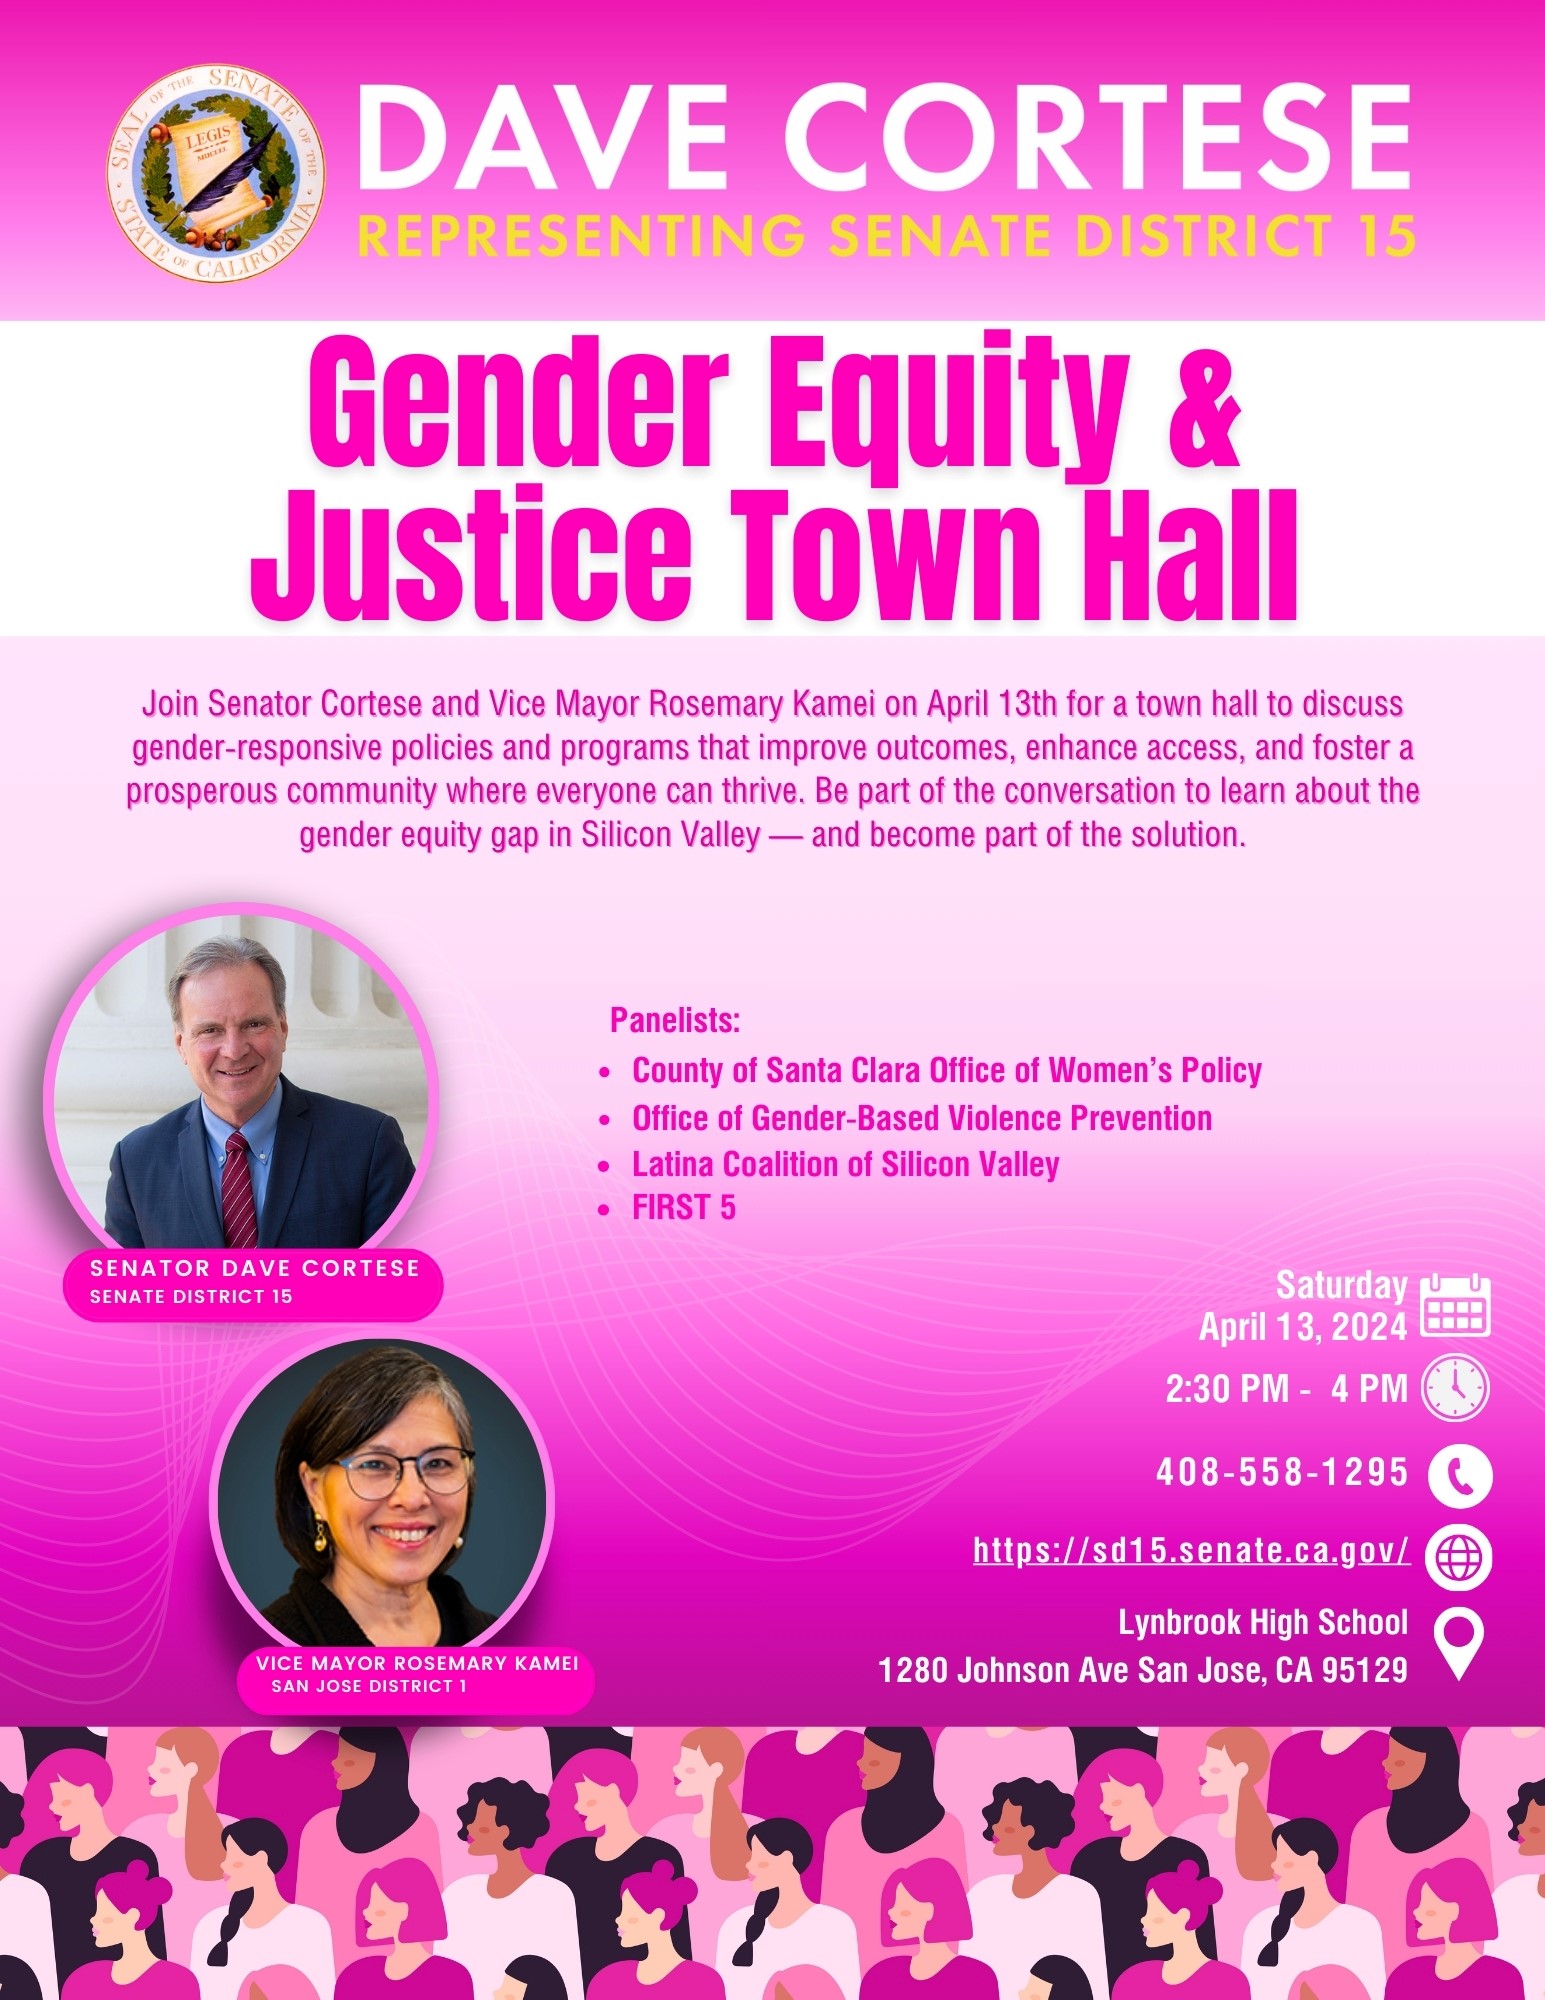 Join Senator Cortese’s Town Hall on Gender Equity and Justice 